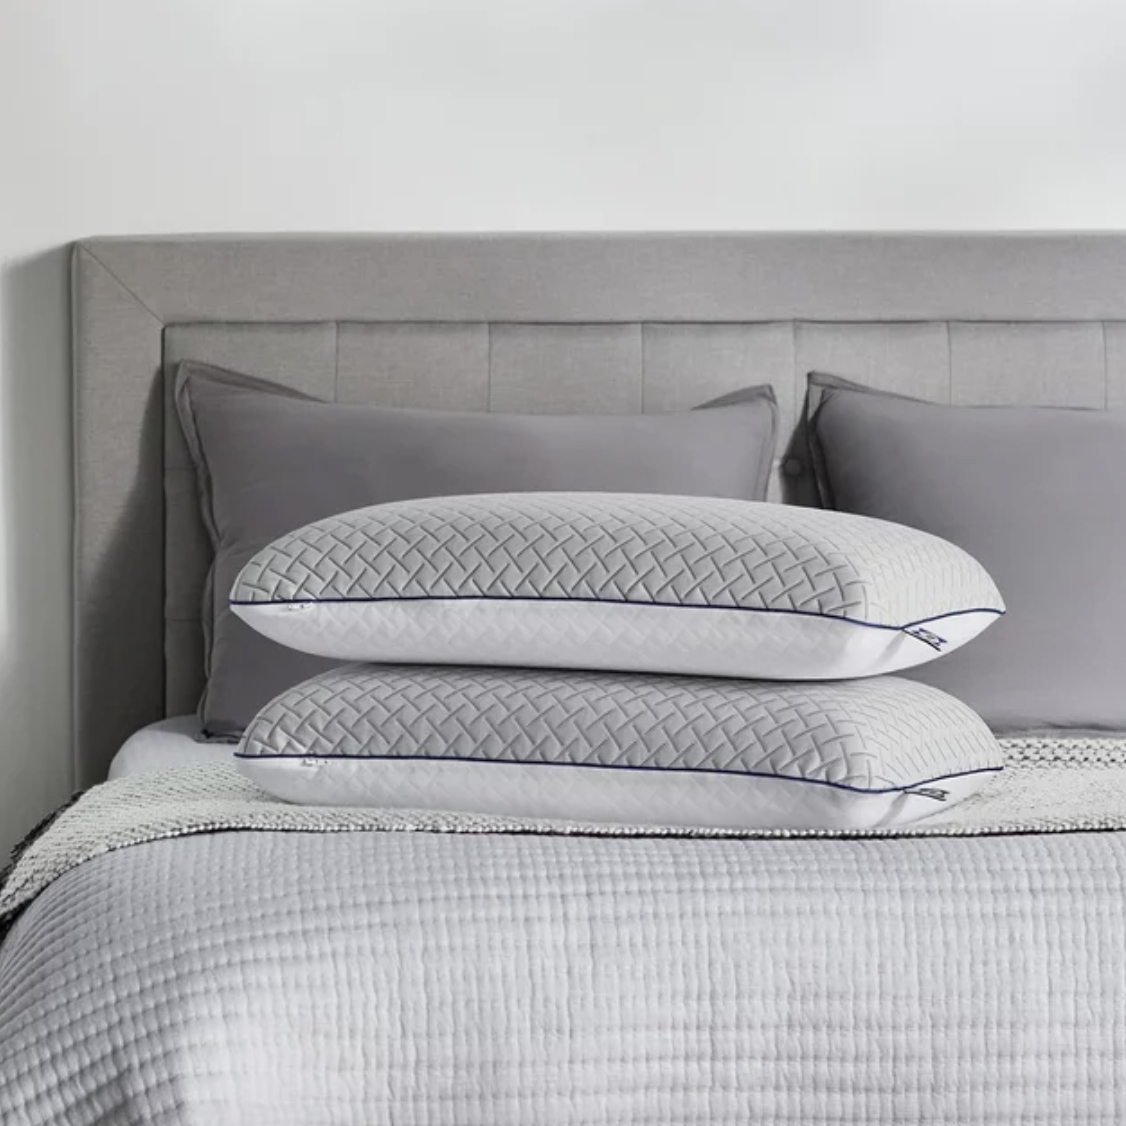 Four memory foam pillows on a bed with a textured design